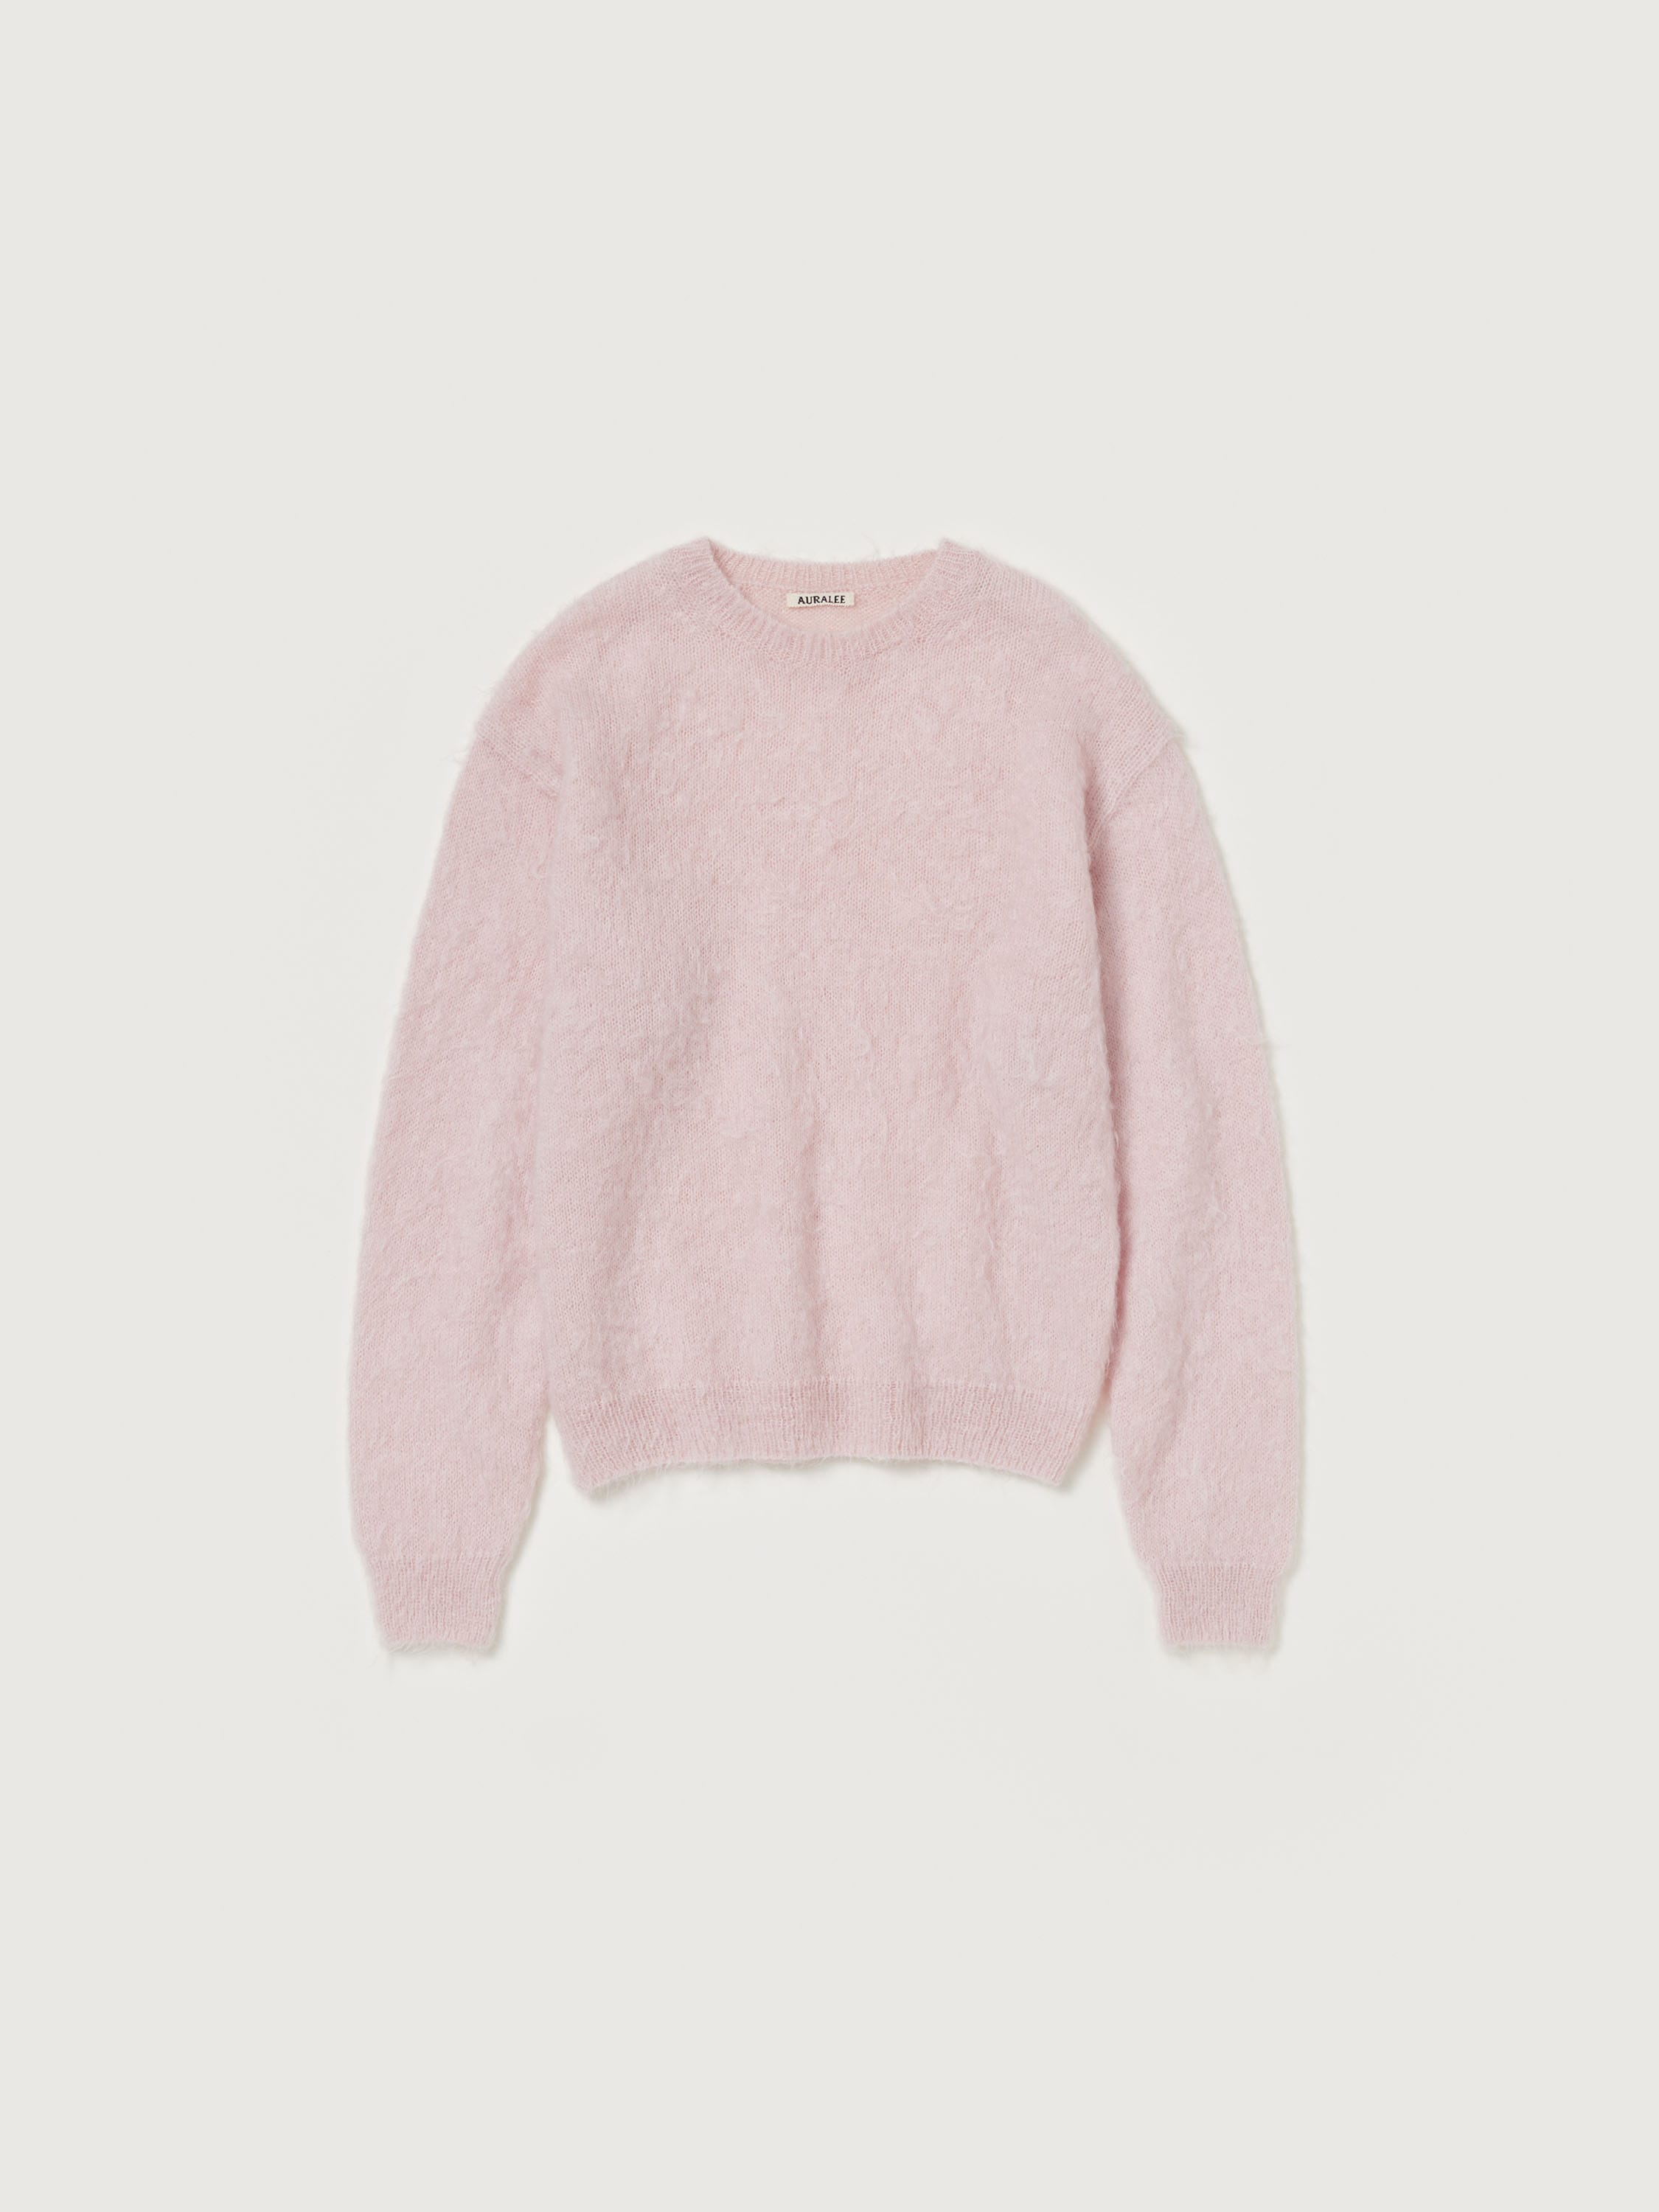 AURALEE BRUSHED SUPER KID MOHAIR KNIT | www.causus.be